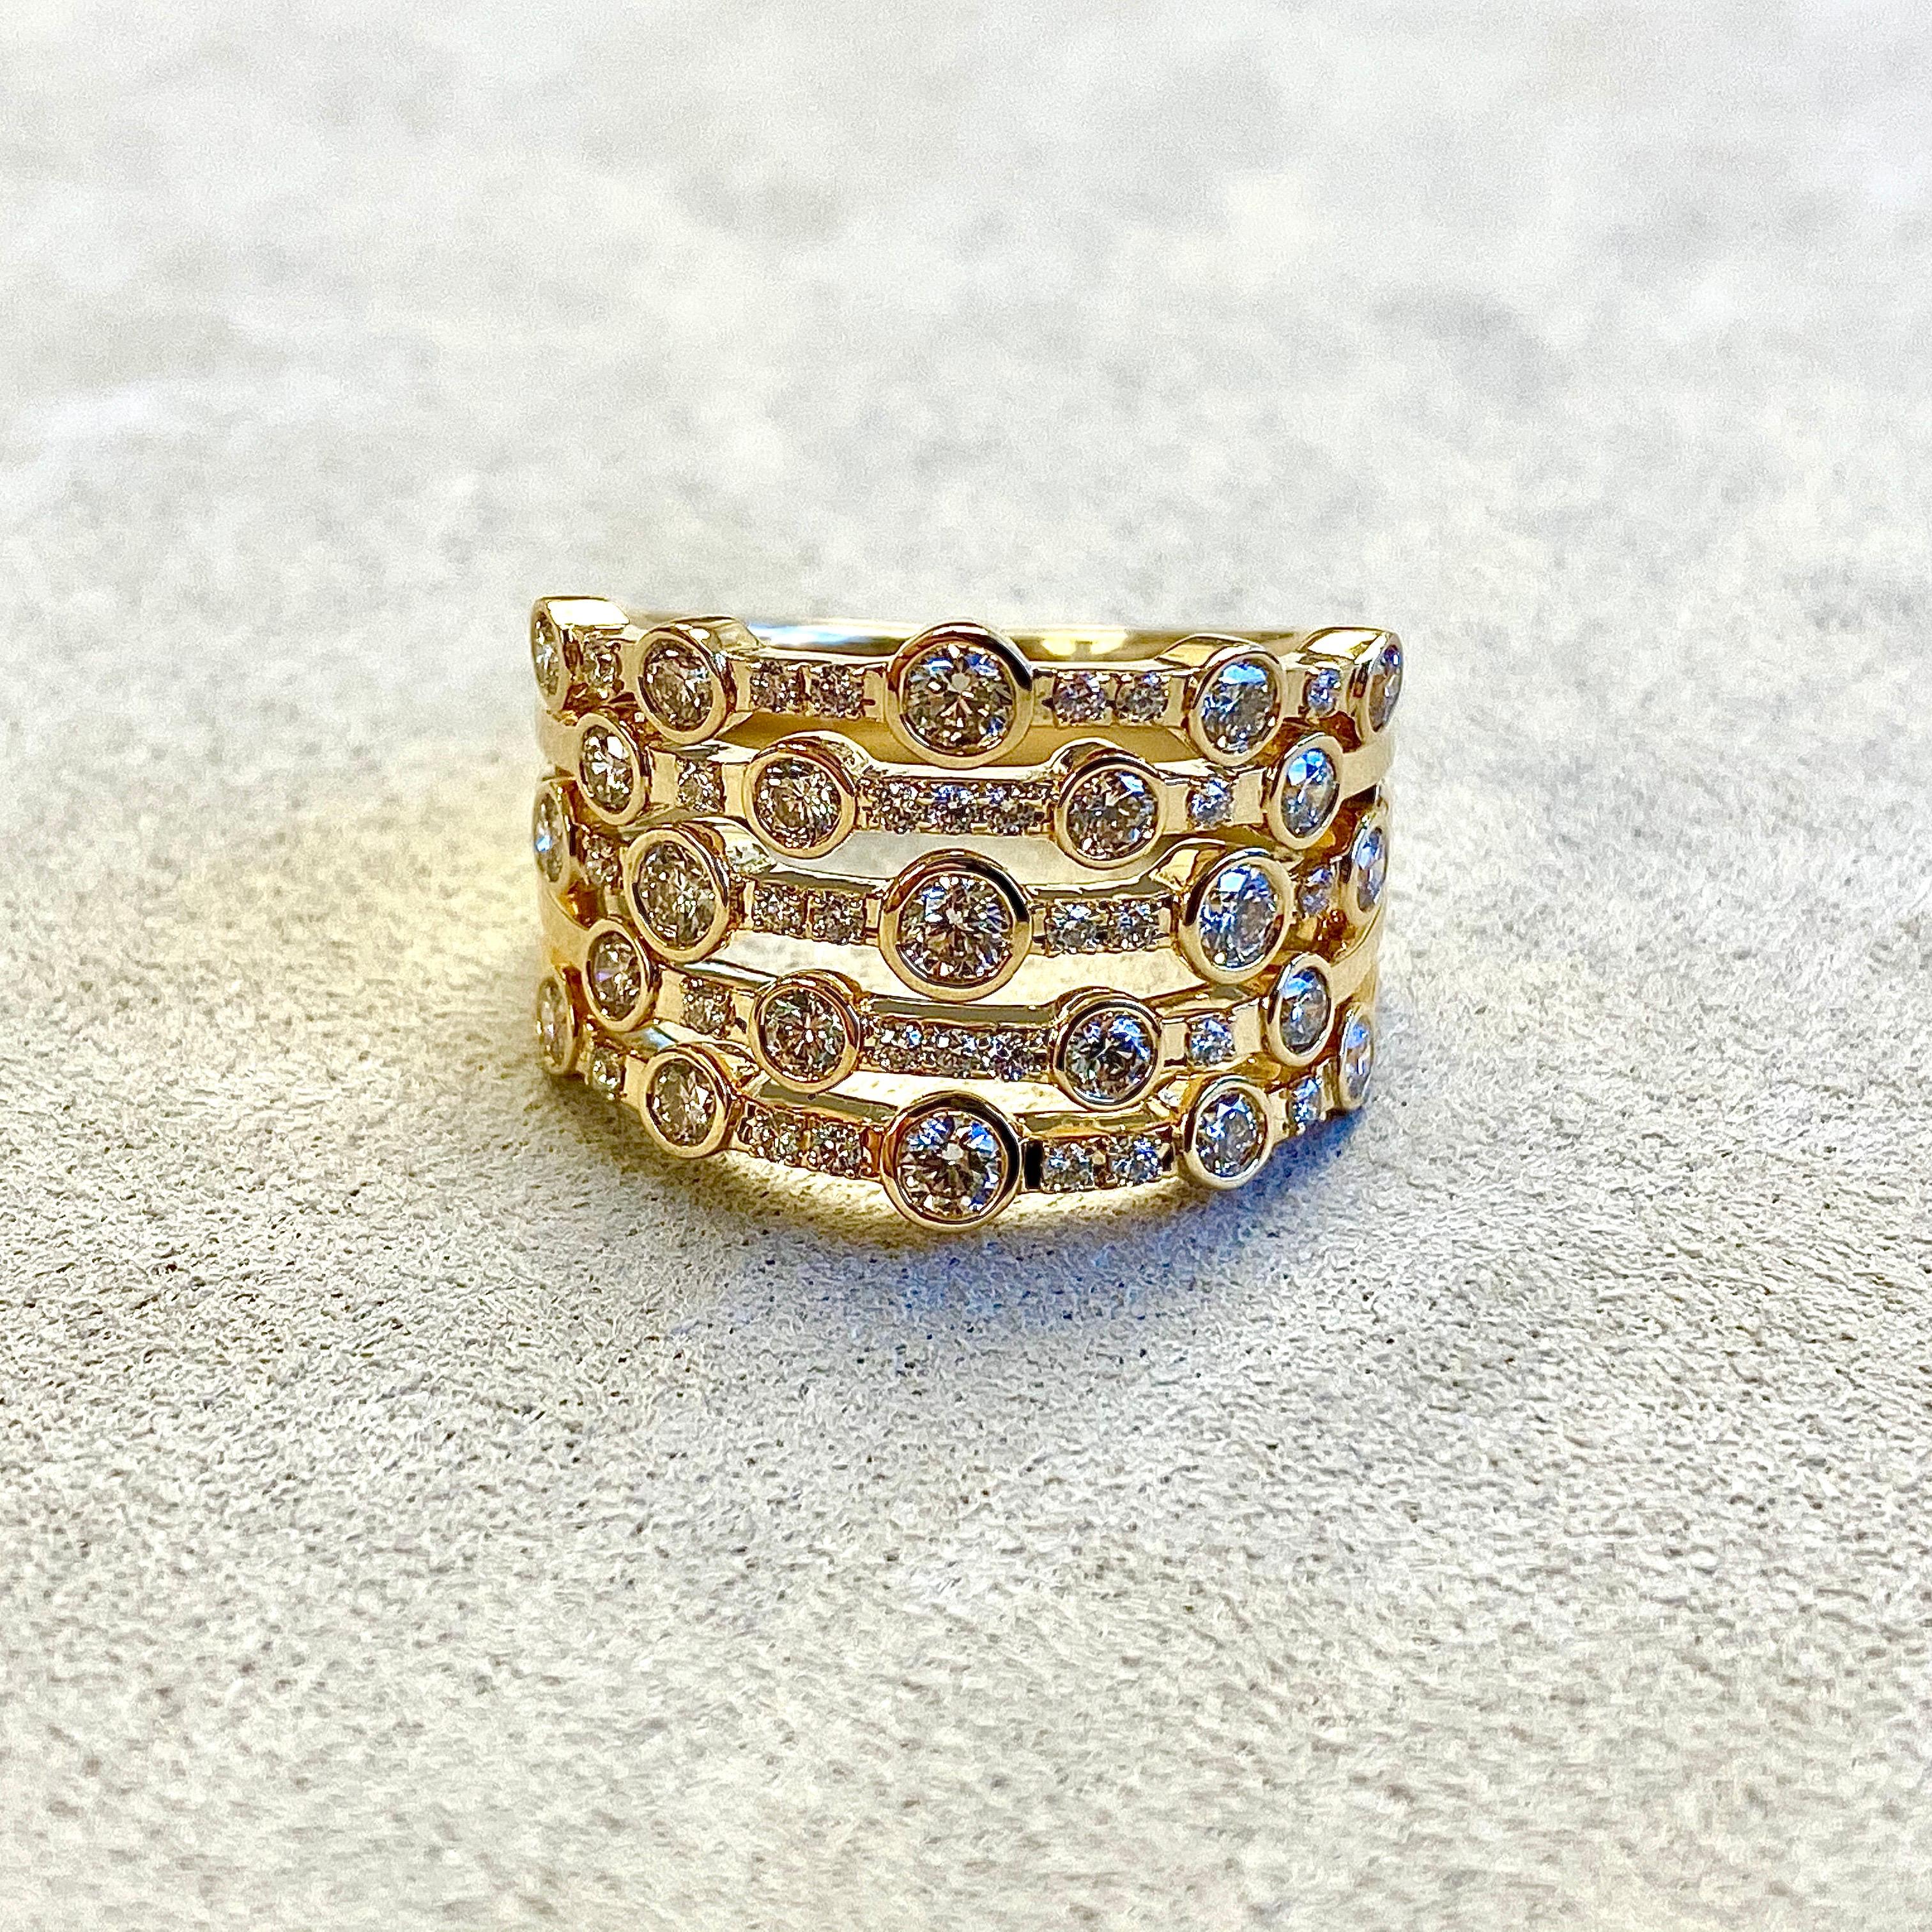 Created in 18 karat yellow gold
Diamonds 1.20 cts approx
Band size US 7 
Limited edition

About the Designers ~ Dharmesh & Namrata

Drawing inspiration from little things, Dharmesh & Namrata Kothari have created an extraordinary and refreshing